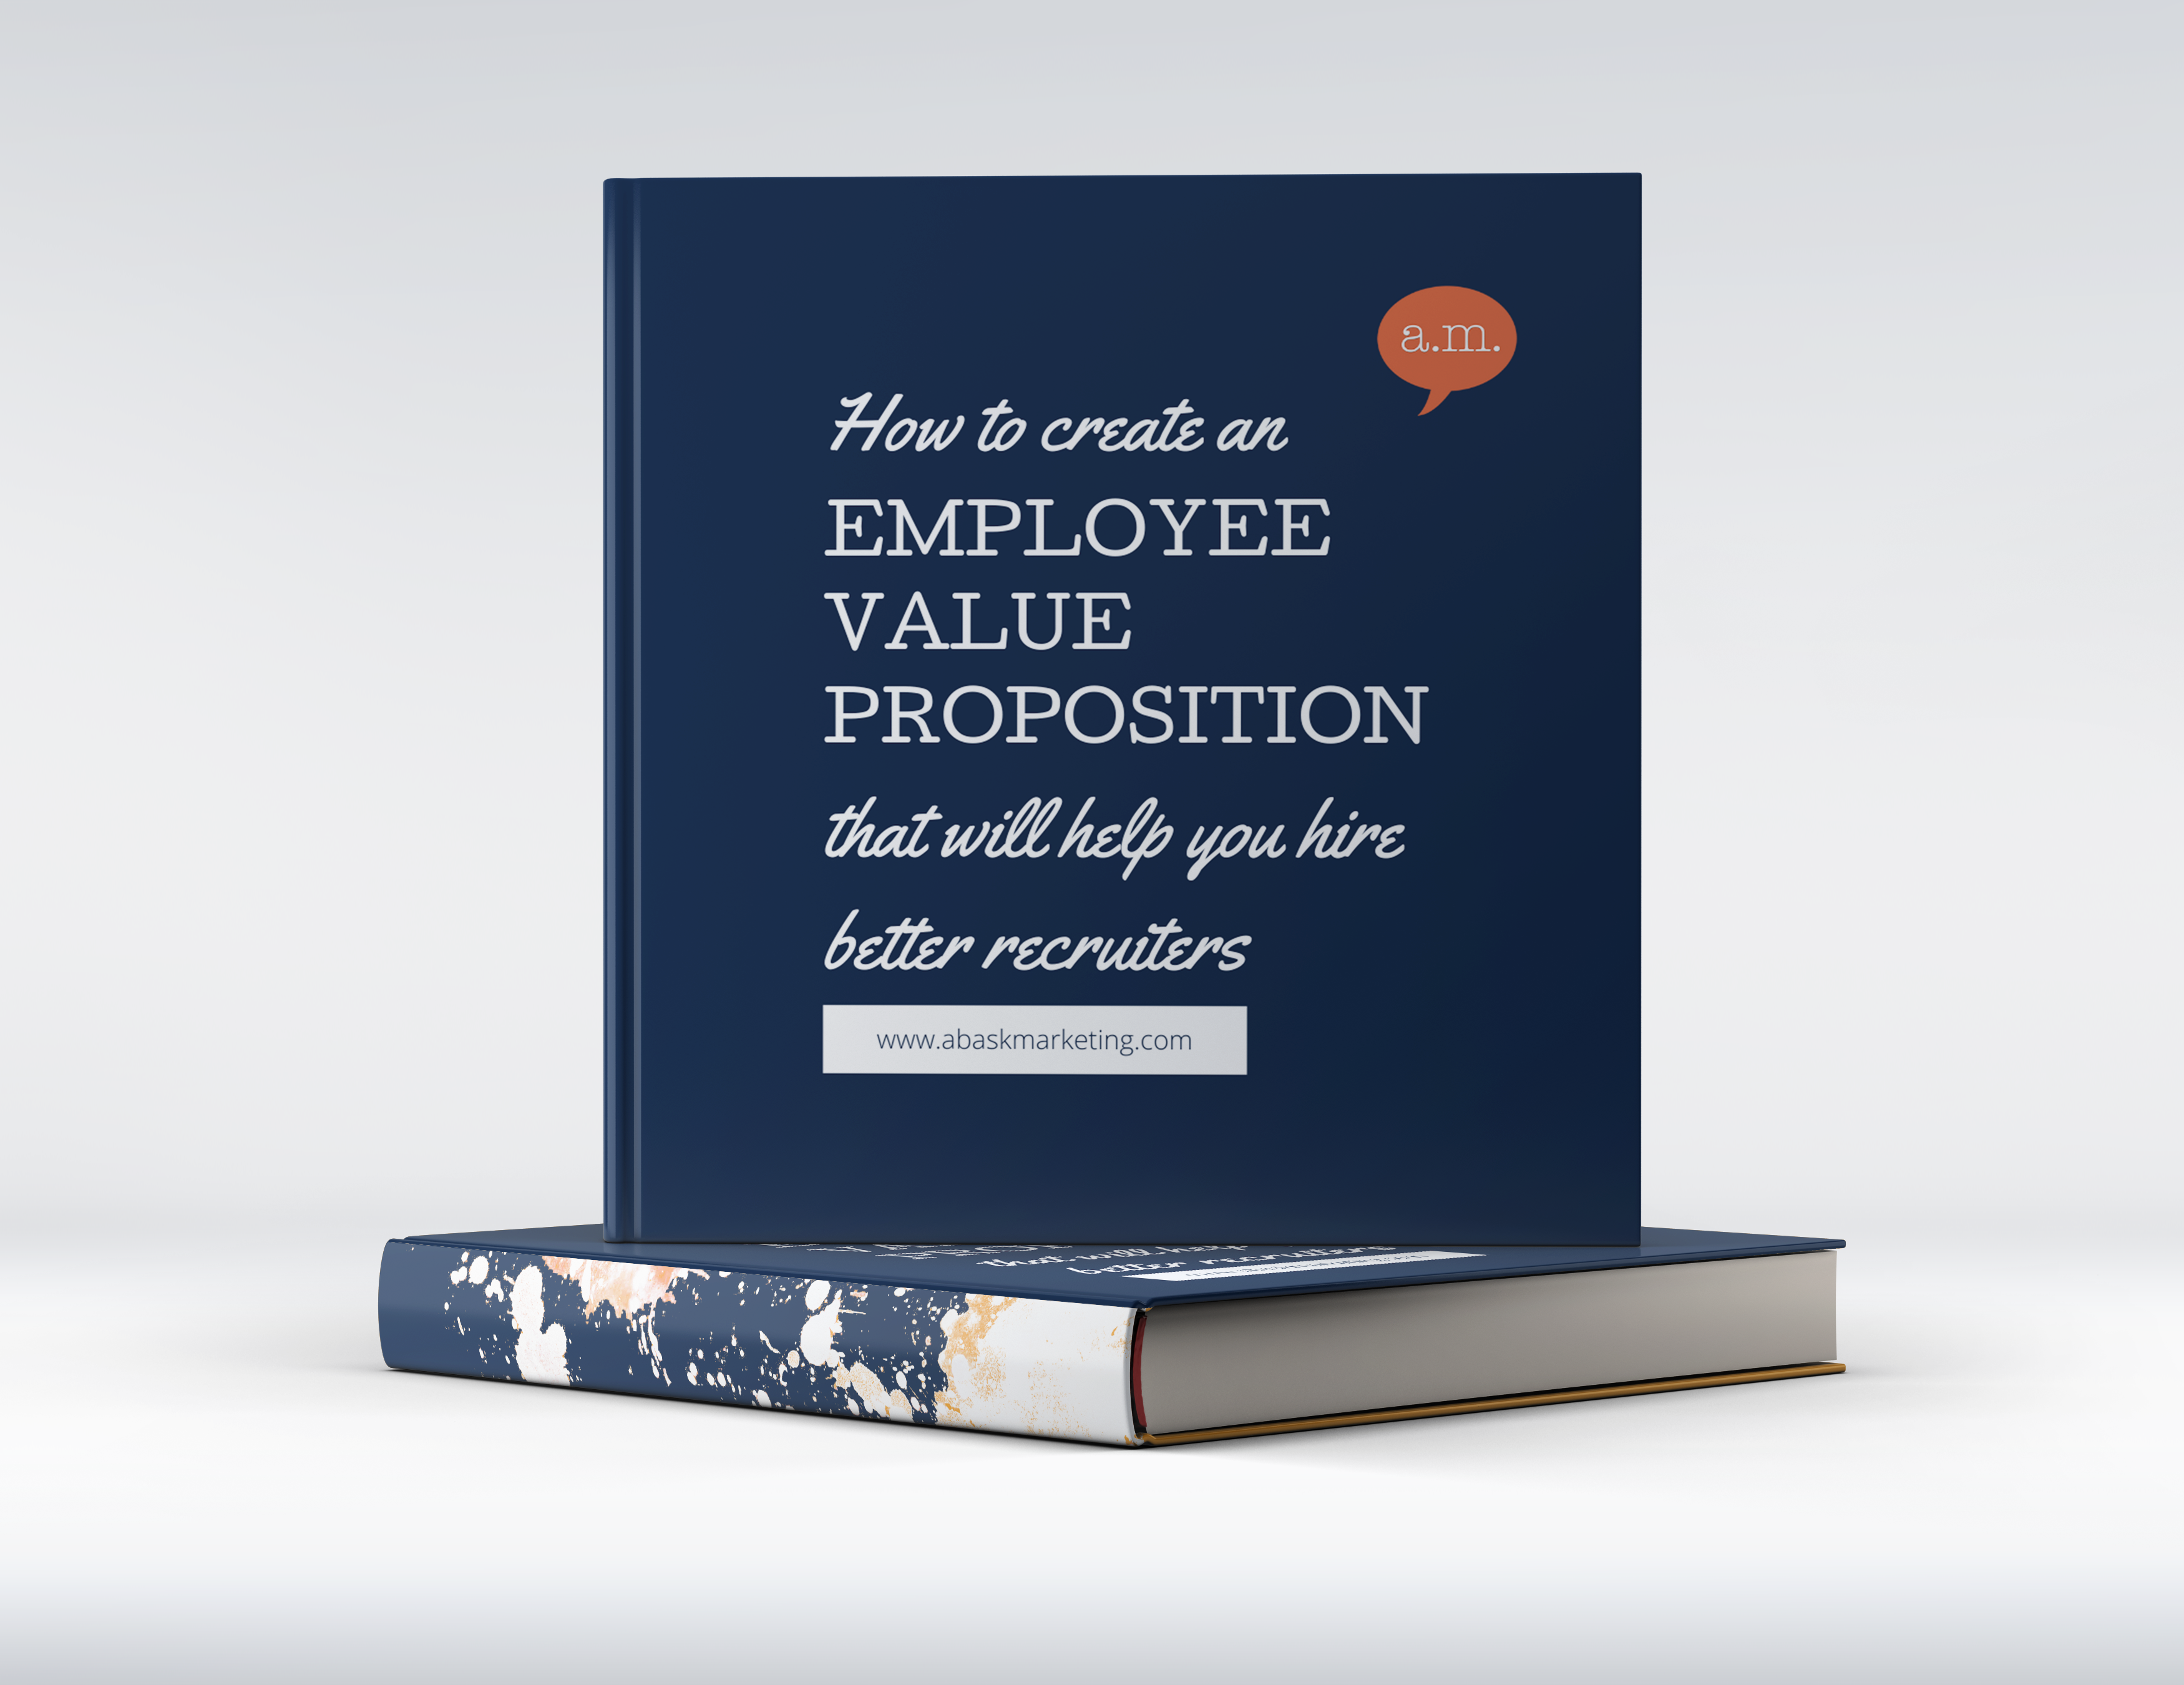 The Employee Value Proposition Guide